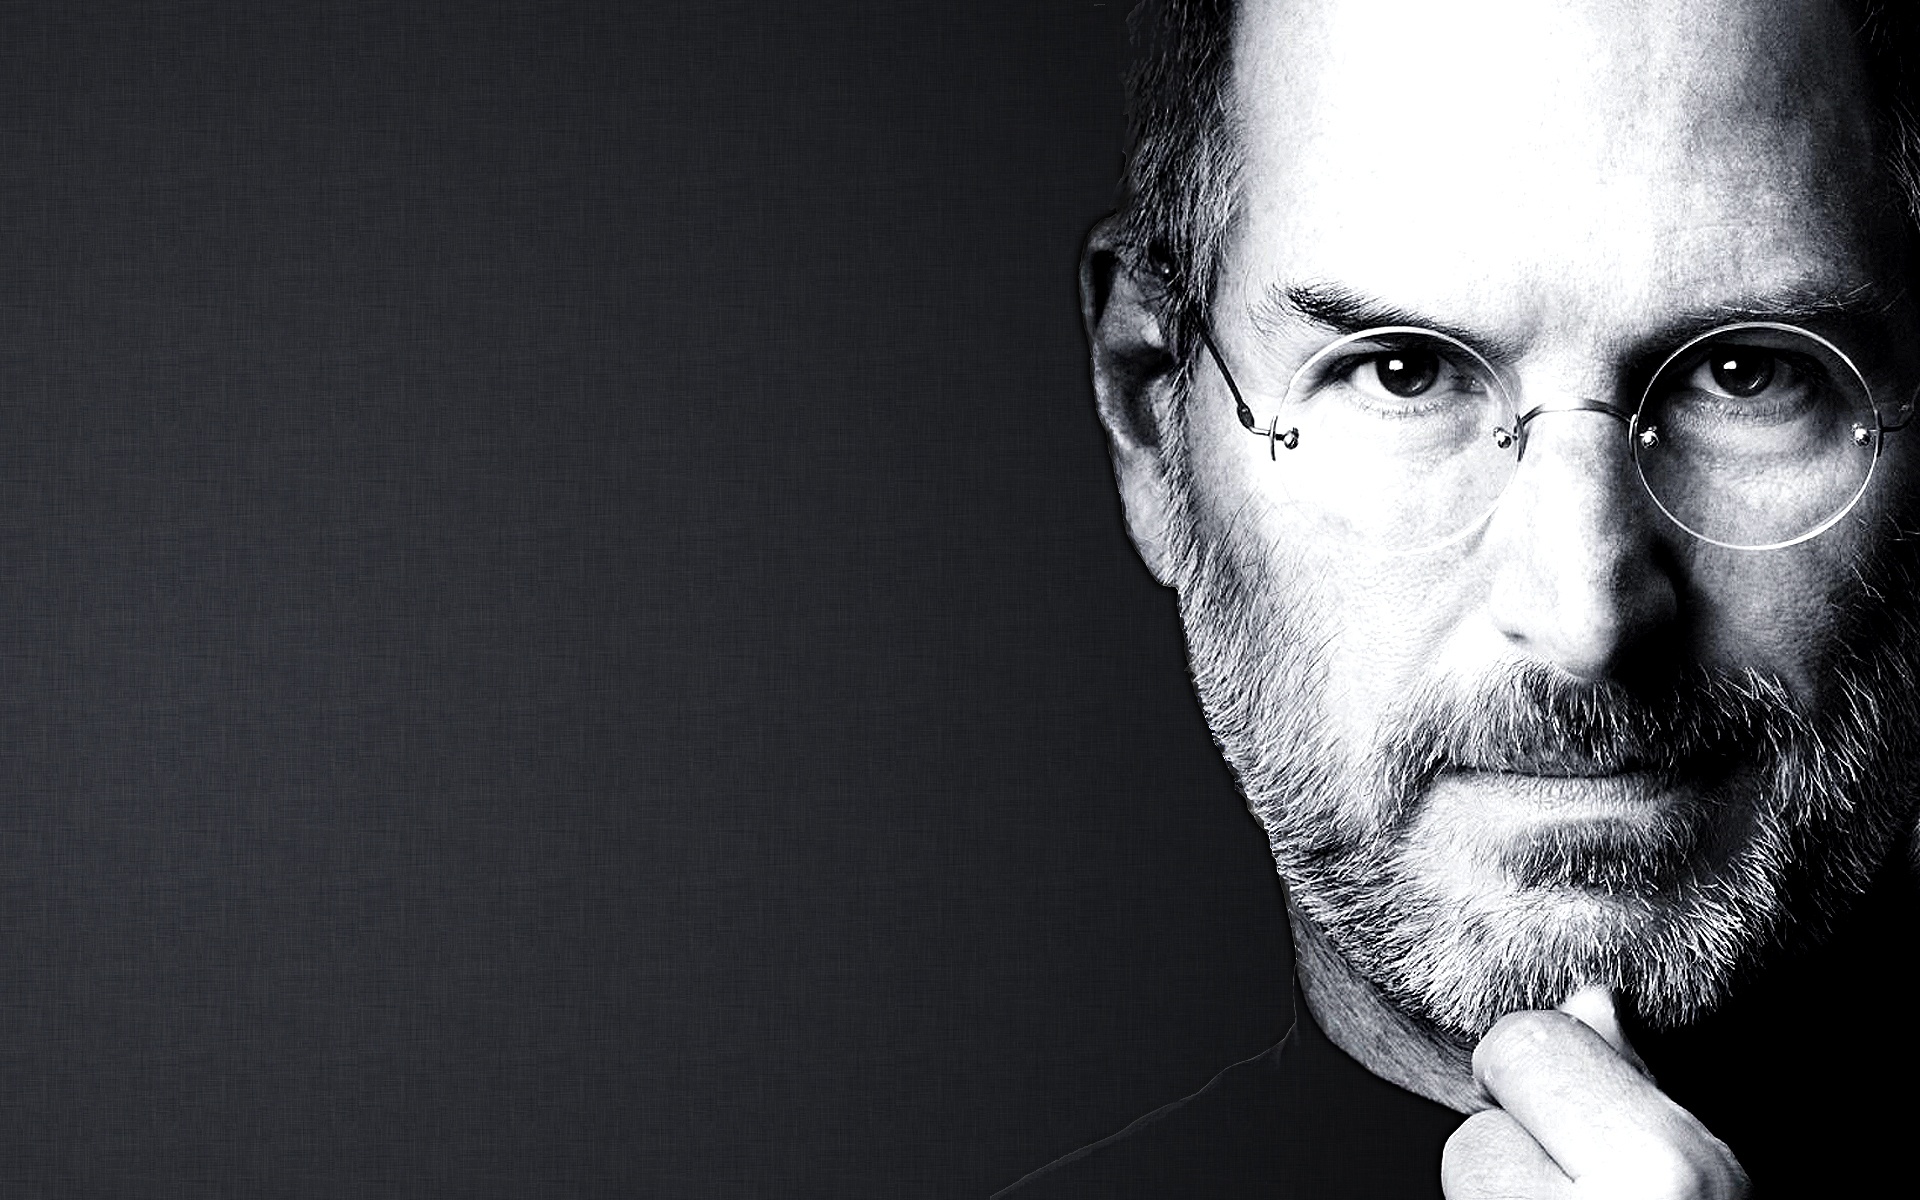 Steve Jobs’ legacy includes the Women he inspired…